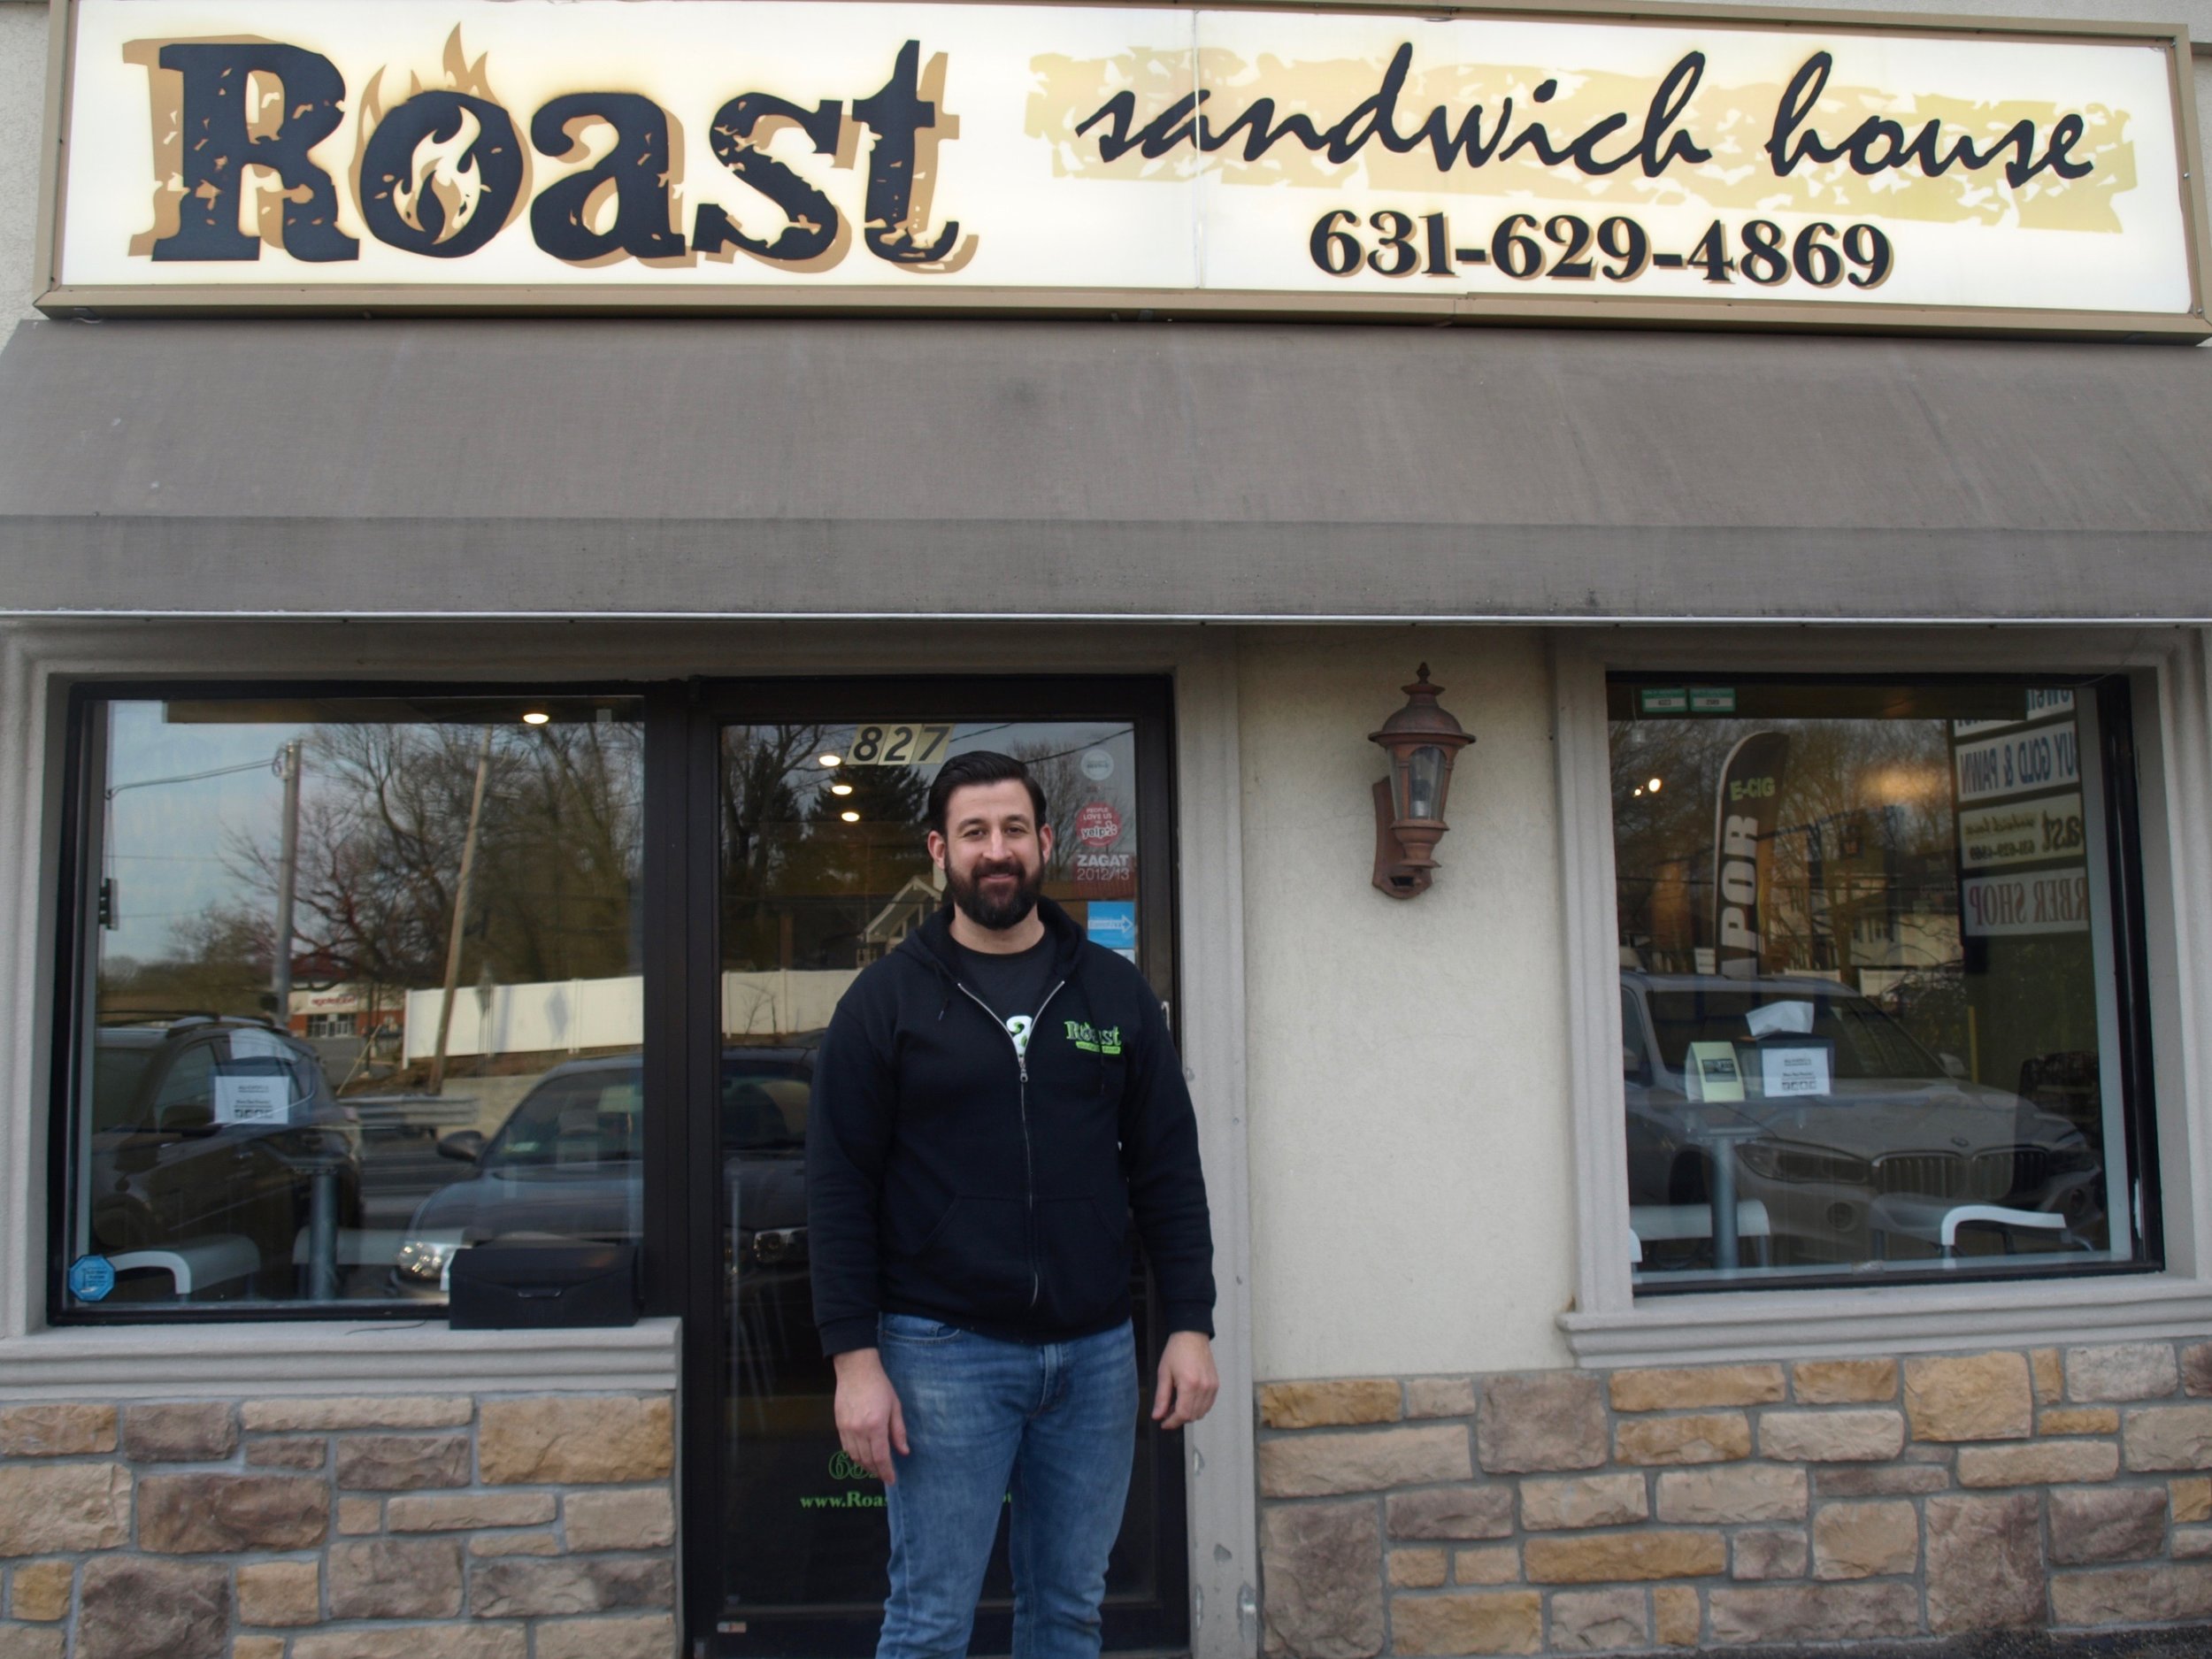  Owner Paul Doyle established Roast Sandwich House in Melville in 2010 and has since opened additional locations. 